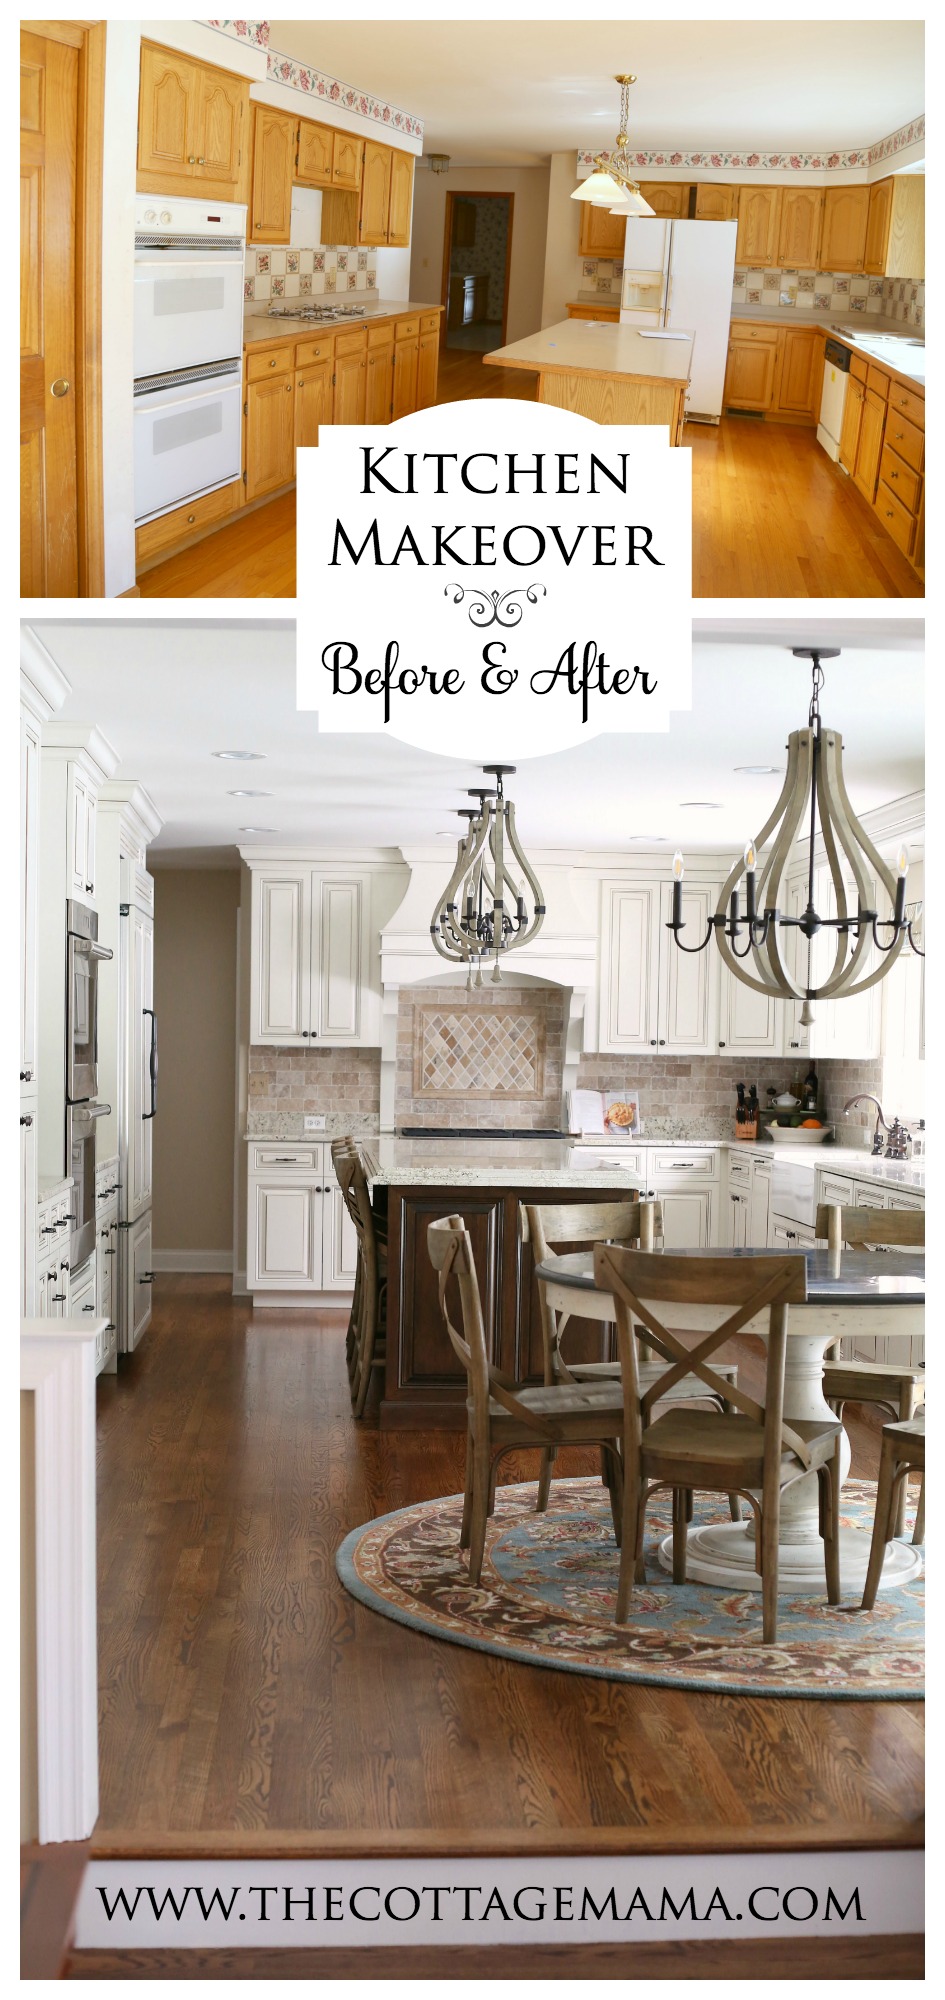 Check out this incredible before and after kitchen makeover from The Cottage Mama. Amazing!